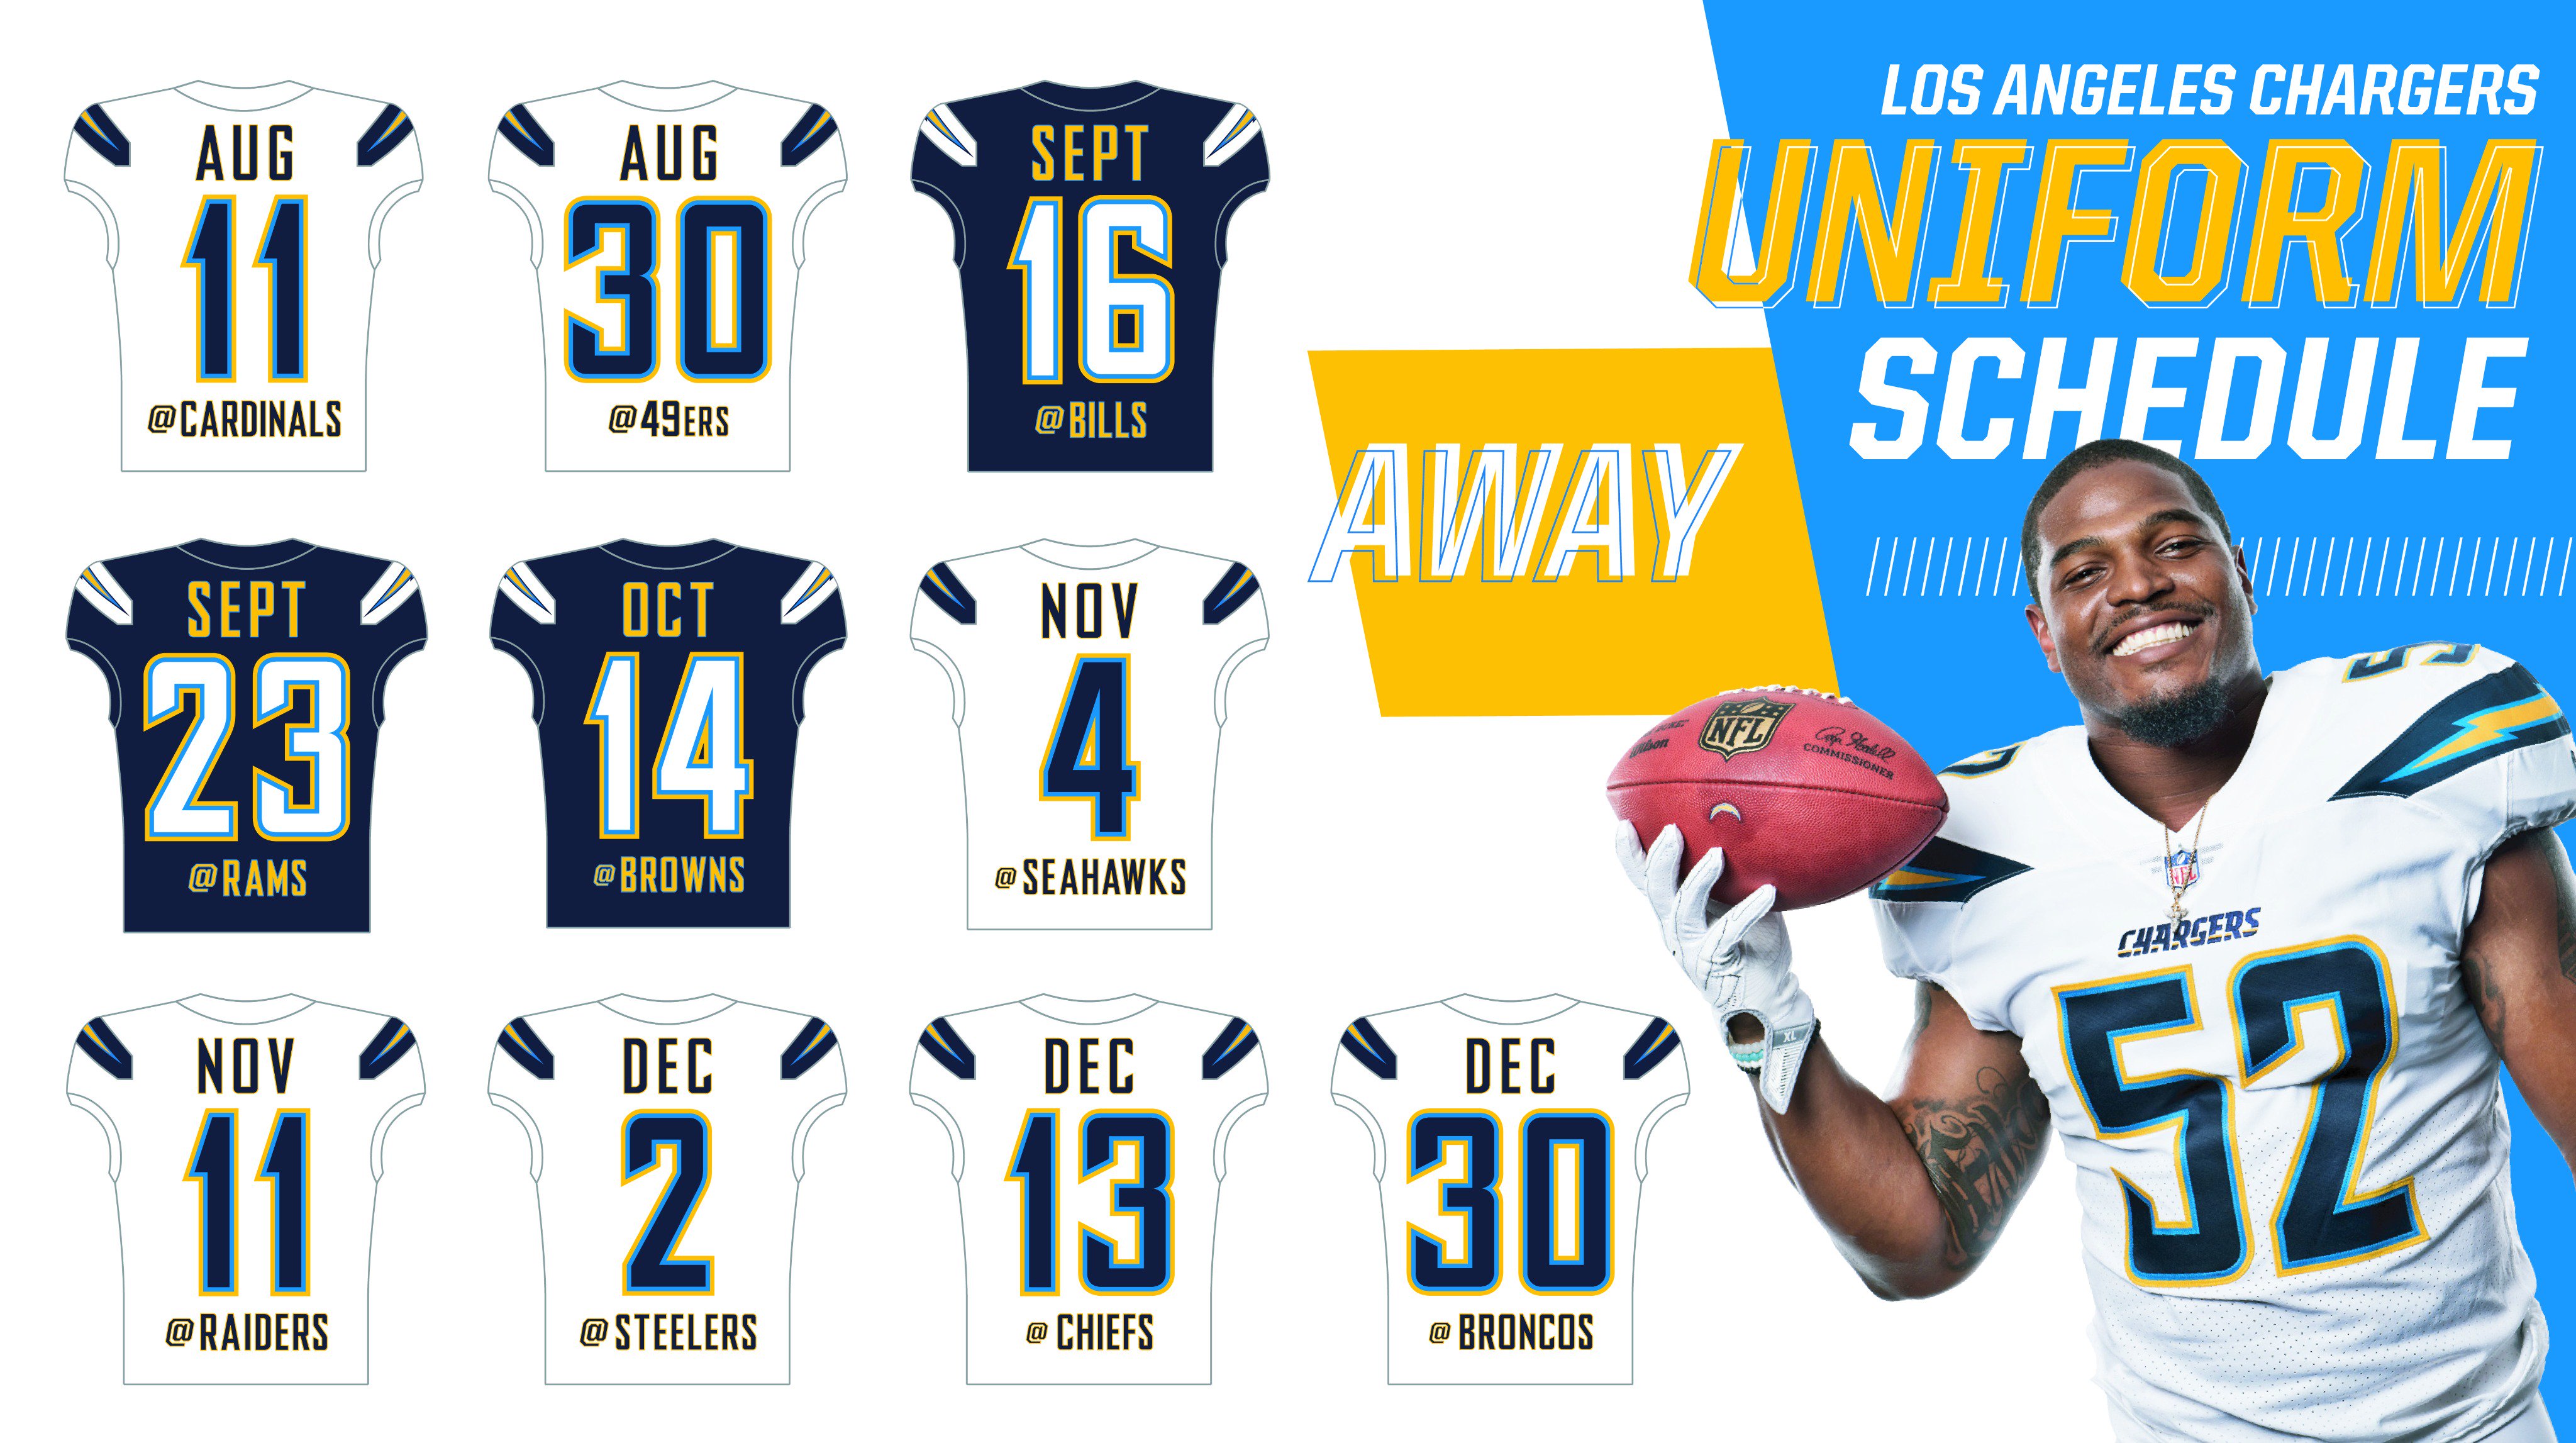 Los Angeles Chargers - Check out our 2017 Uniform Schedule. We'll be  rocking the navy blues this weekend💪